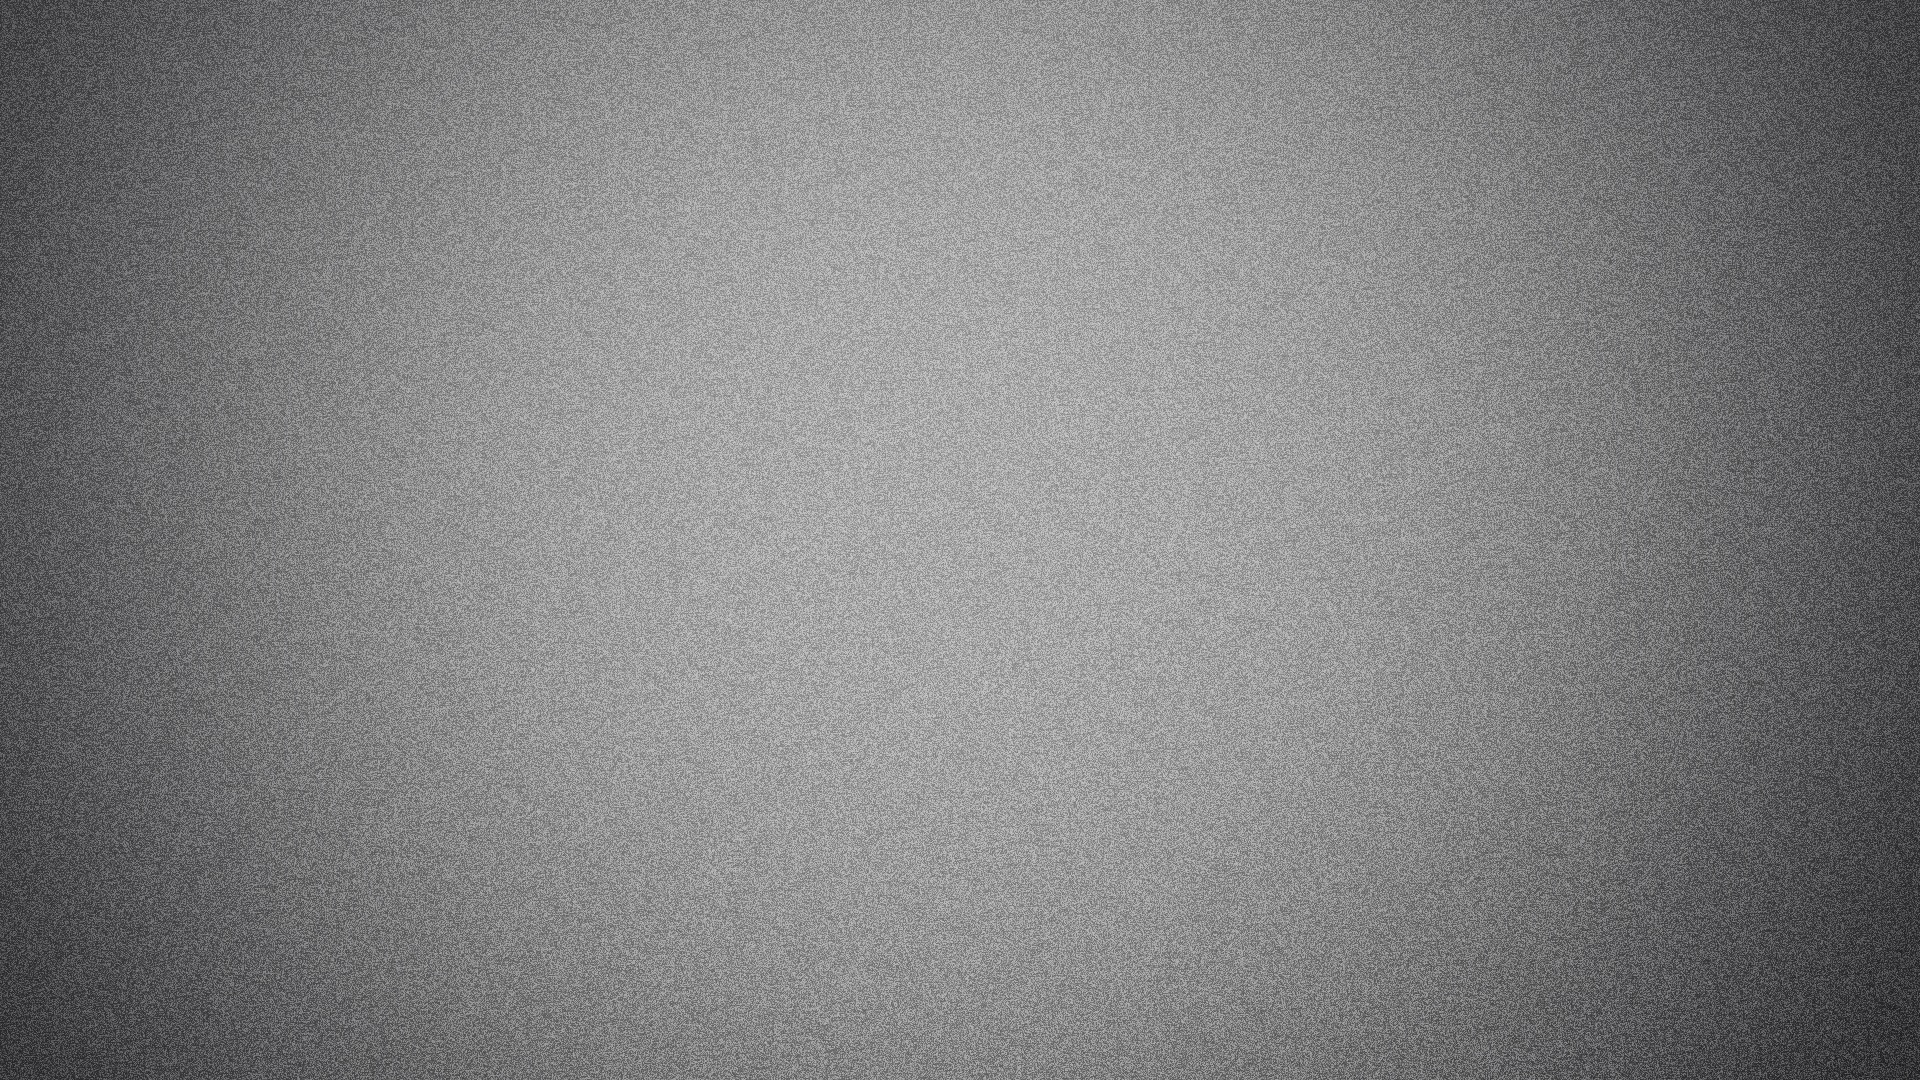 15 Perfect desktop background grey You Can Get It For Free - Aesthetic ...